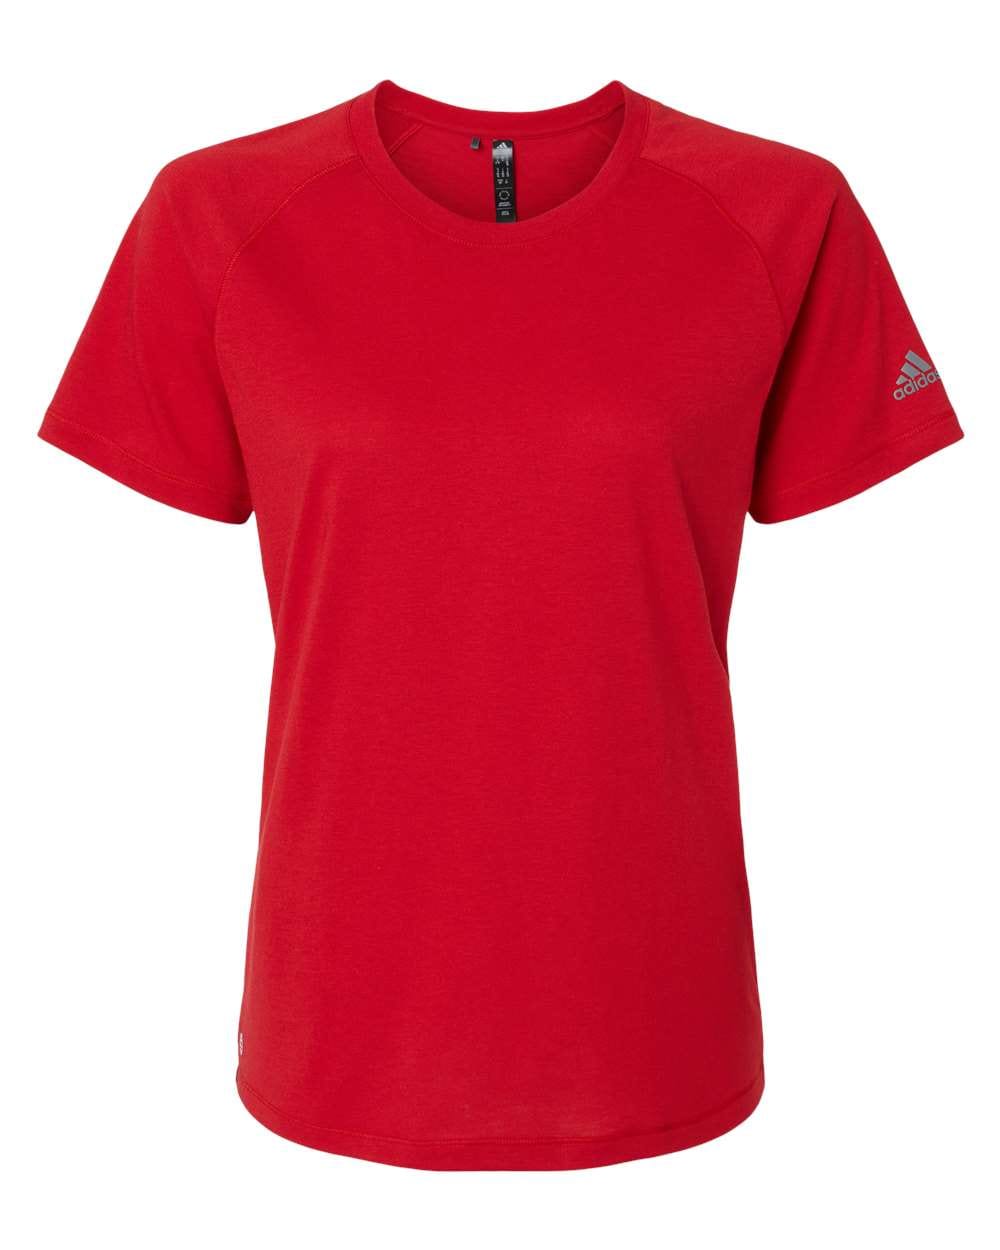 adidas T-shirts S / Power Red adidas - Women's Blended T-Shirt